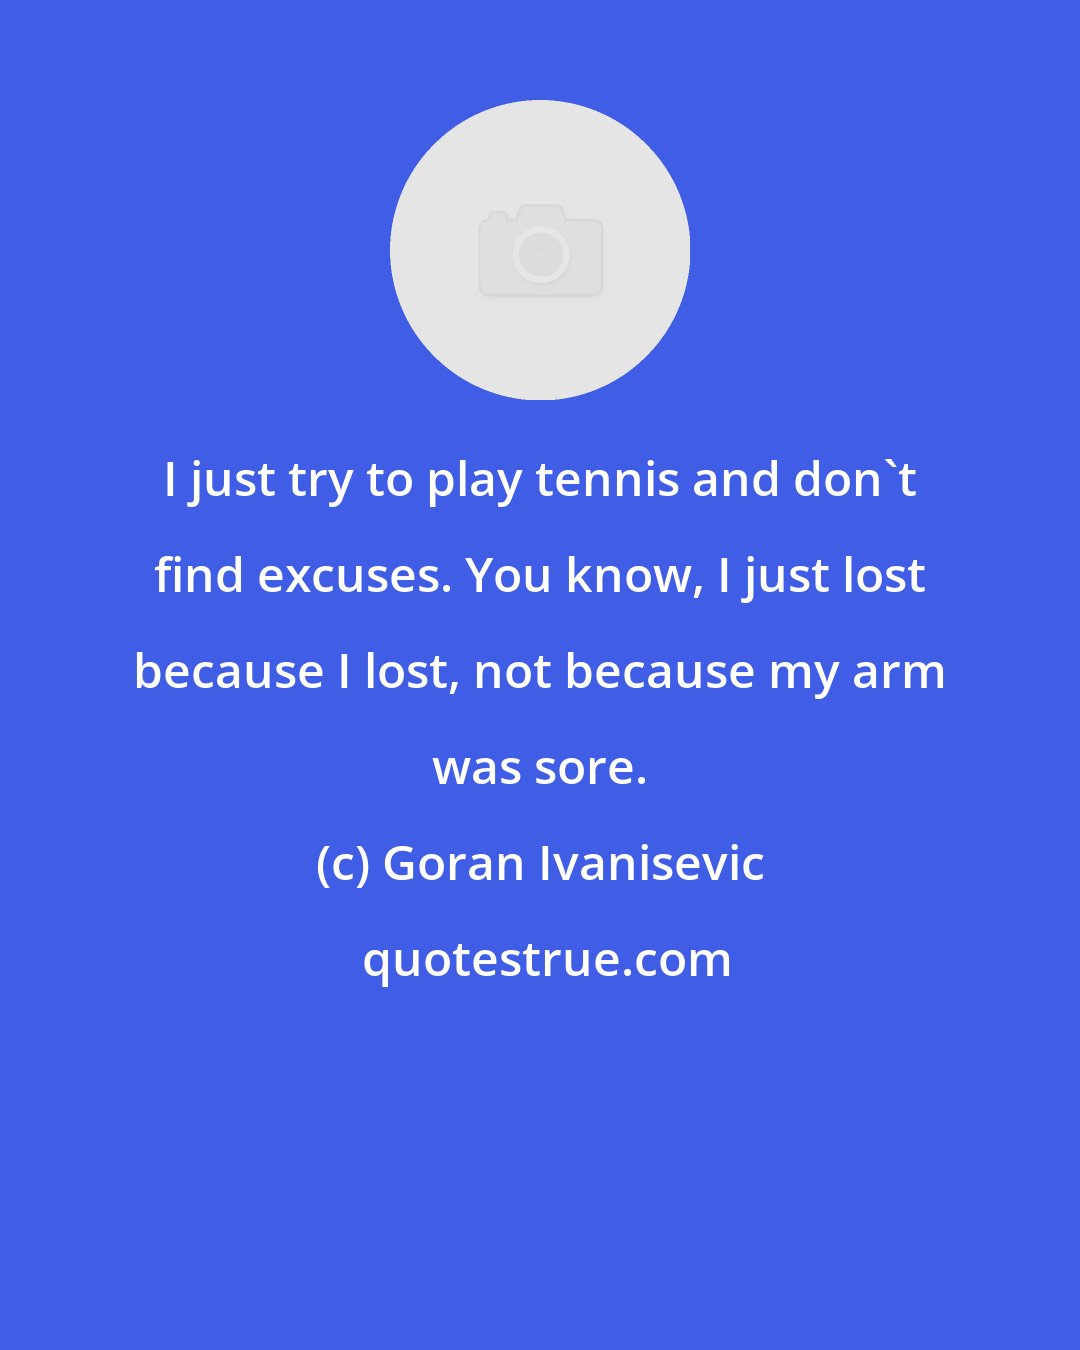 Goran Ivanisevic: I just try to play tennis and don't find excuses. You know, I just lost because I lost, not because my arm was sore.